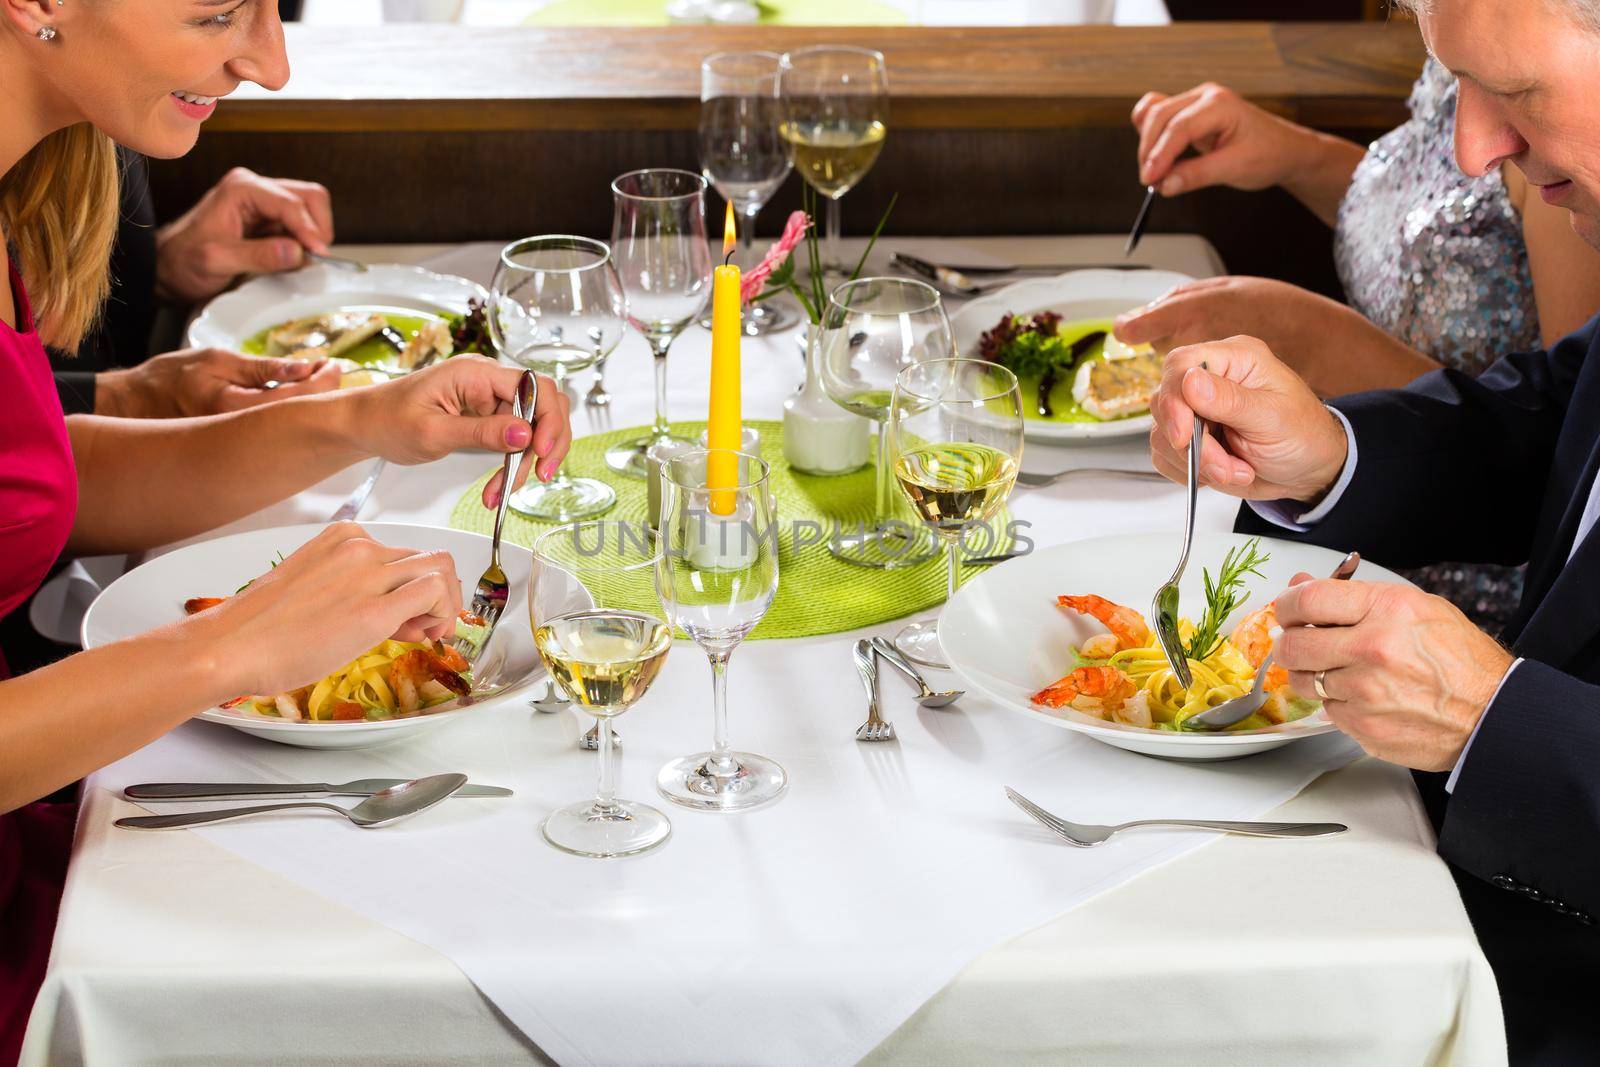 Family, mother and father with adult children and daughter or son in law –fine dining in nice restaurant or hotel